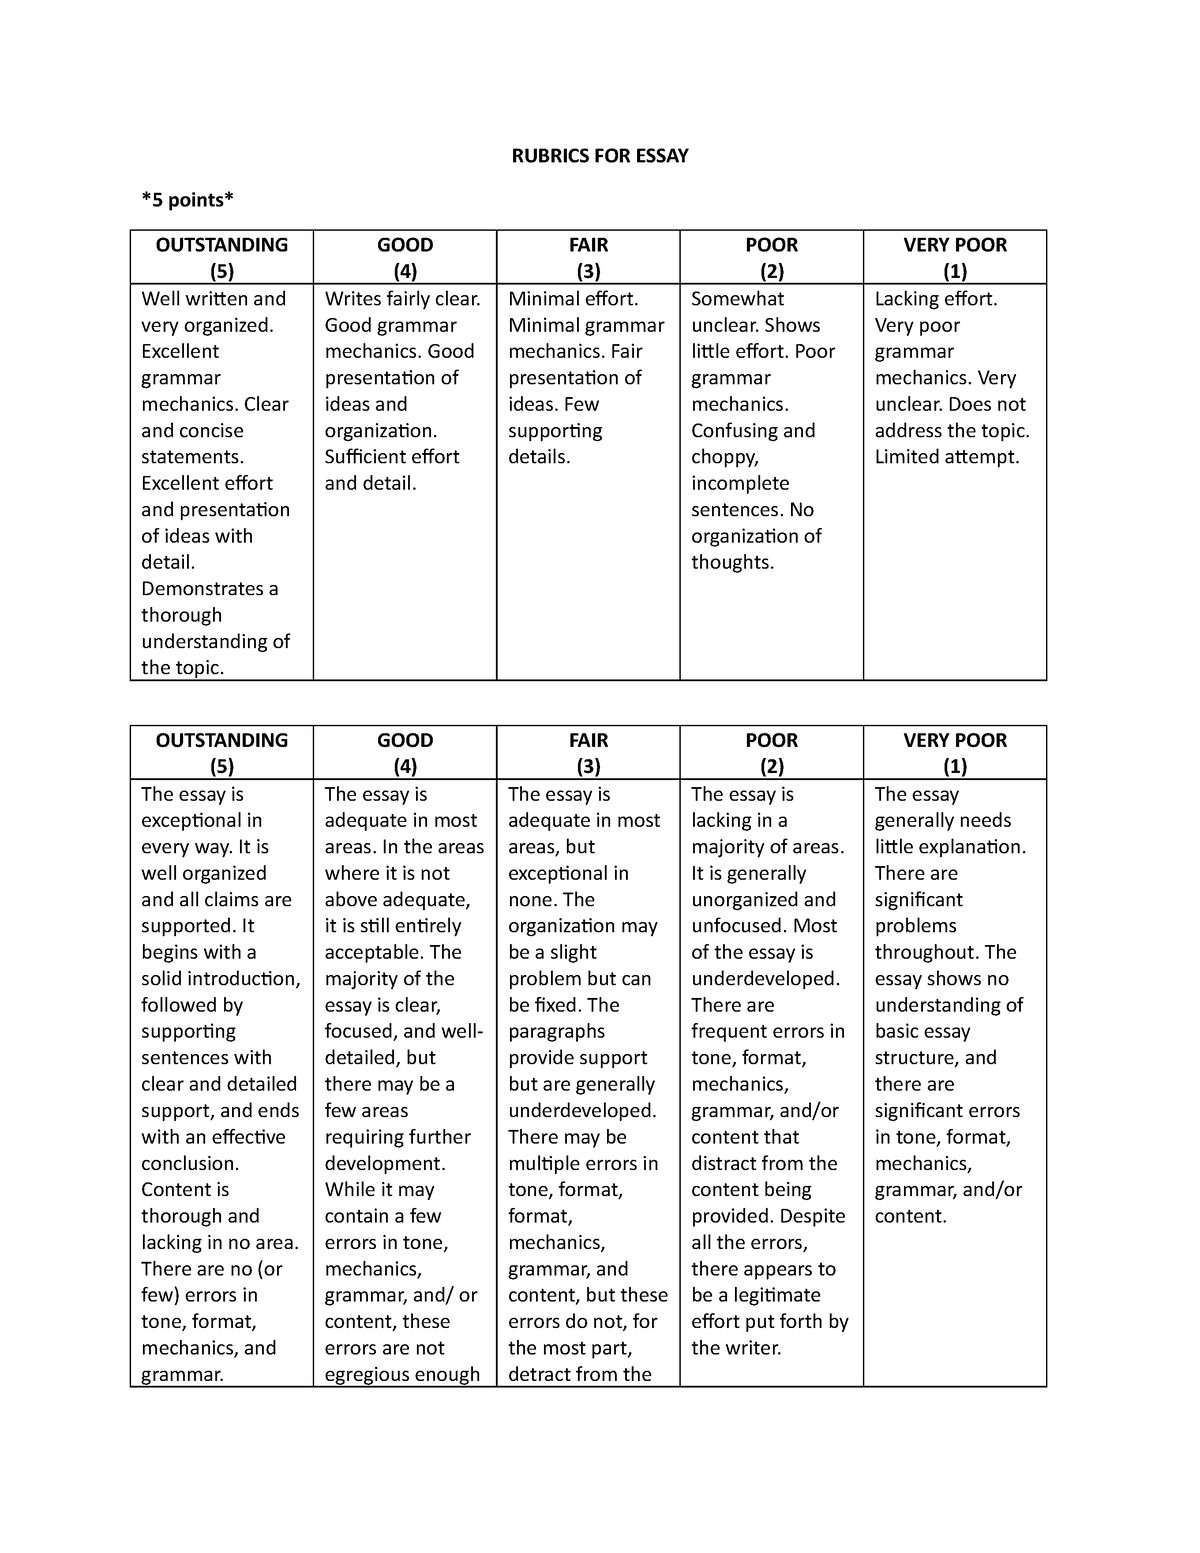 rubric for essay writing 5 points